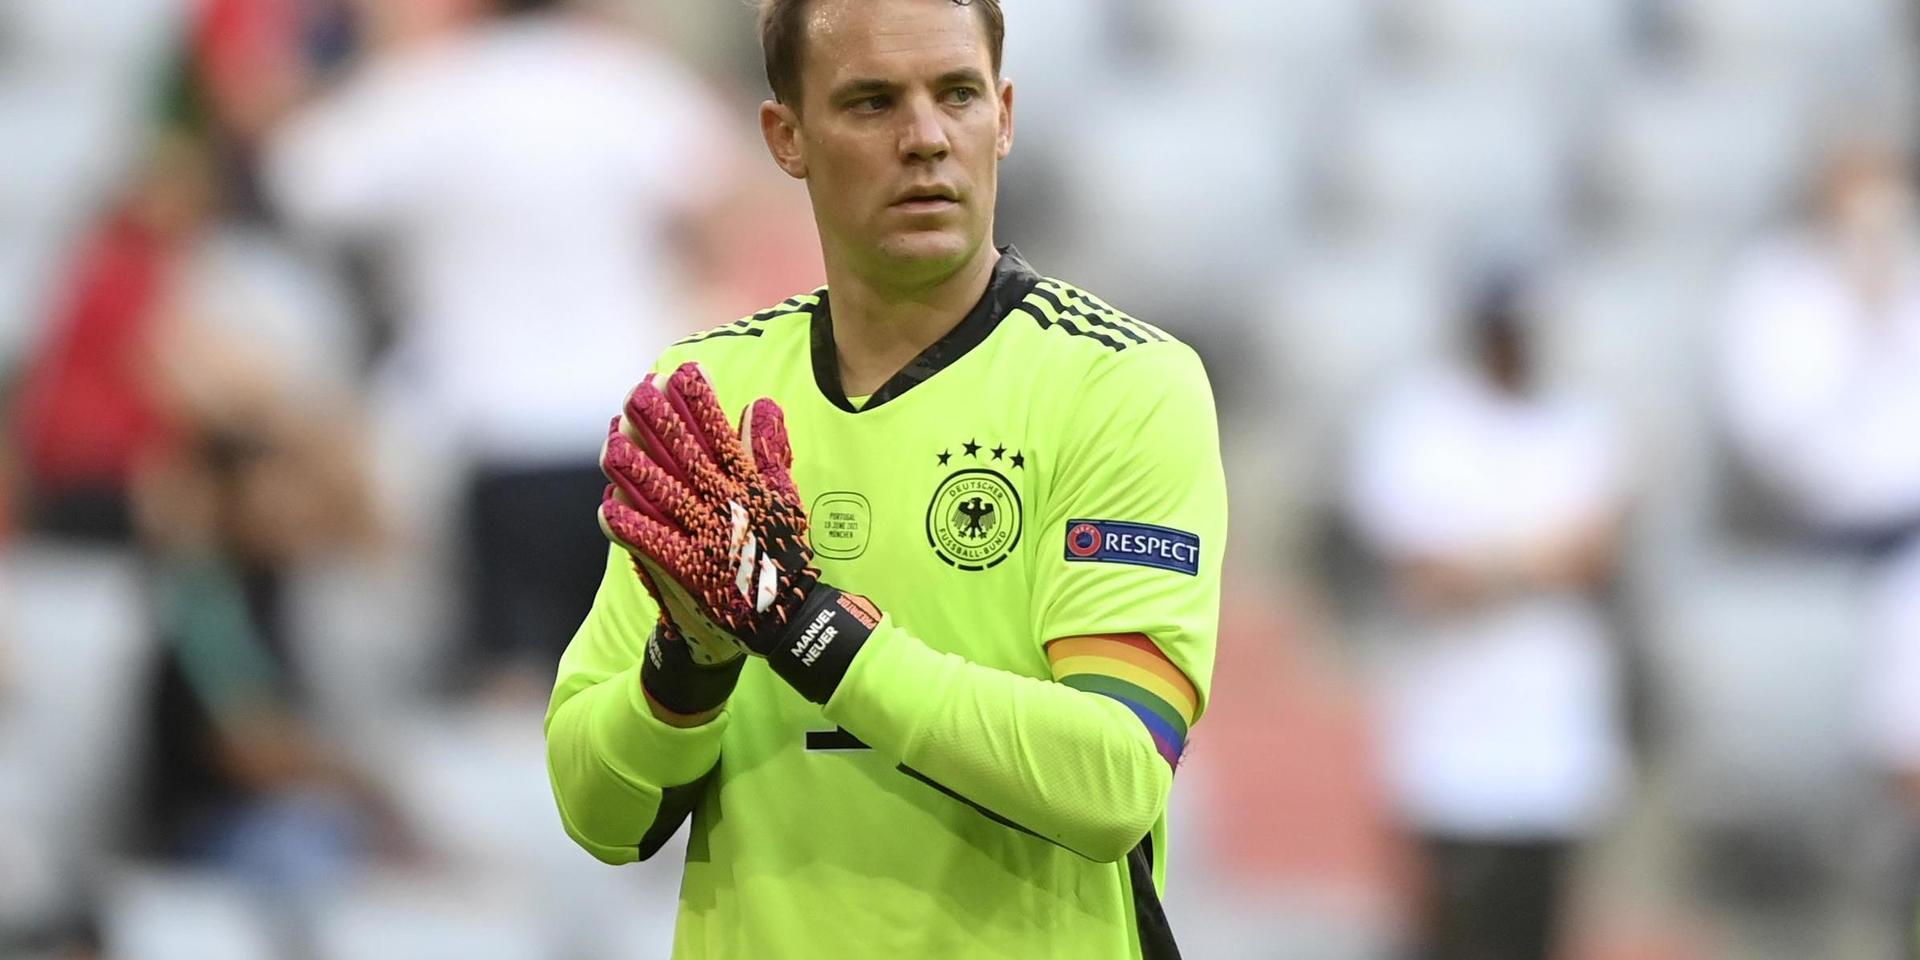 Germany's goalkeeper Manuel Neuer walks on the pitch during the Euro 2020 soccer championship group F match between Portugal and Germany at the Football Arena stadium in Munich, Germany, Saturday, June 19, 2021. (Philipp Guelland/Pool via AP)  XAF132